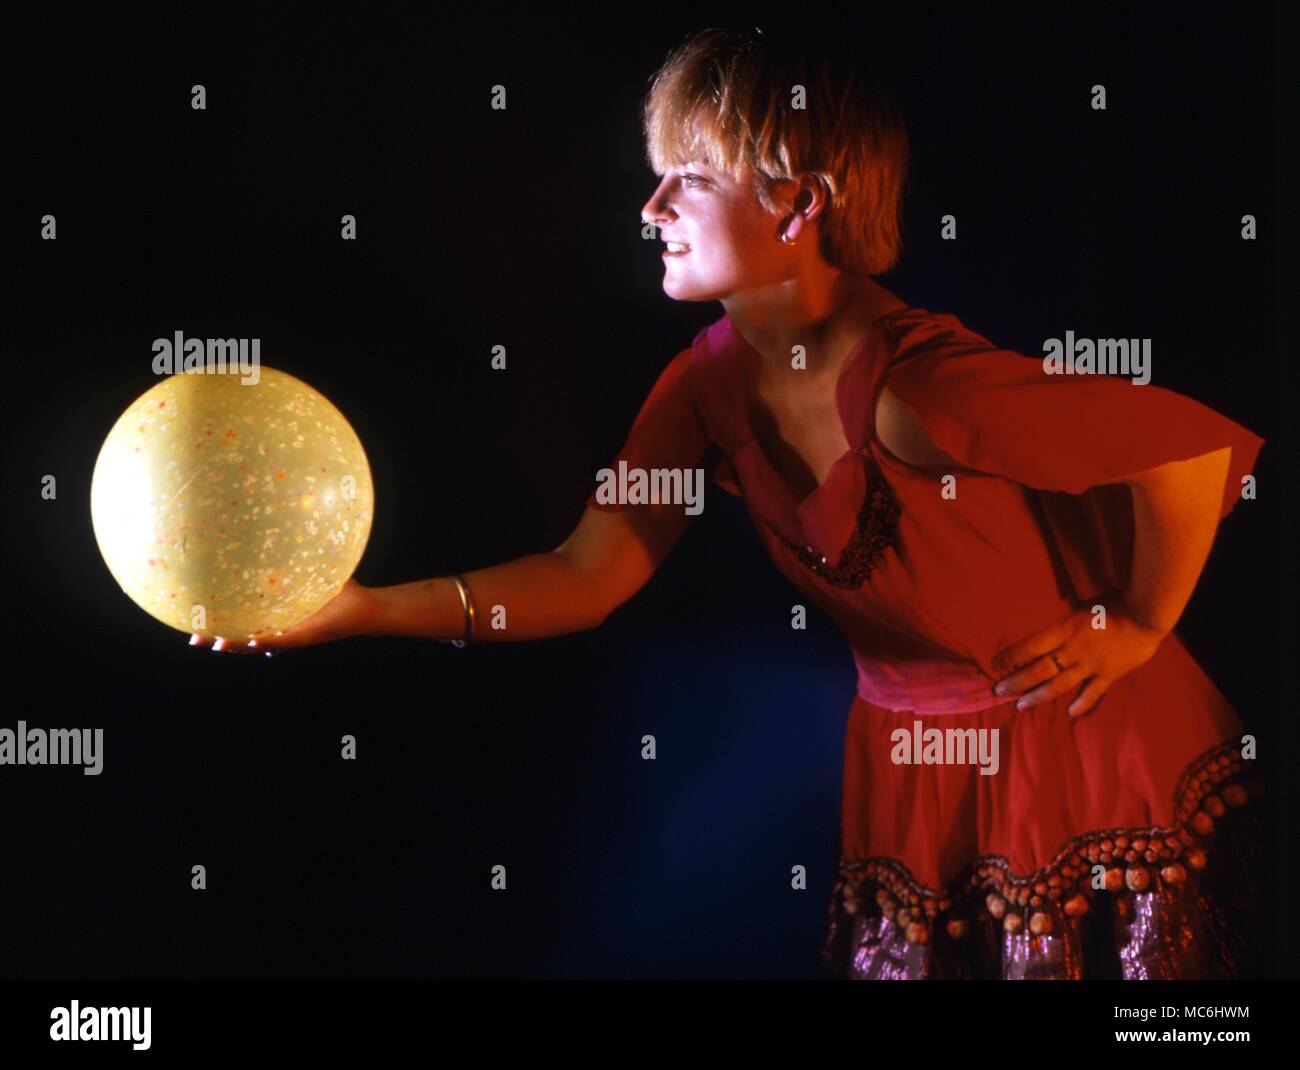 Stage Magic. Throwing things into thin air. The ball disappears when thrown. Stock Photo